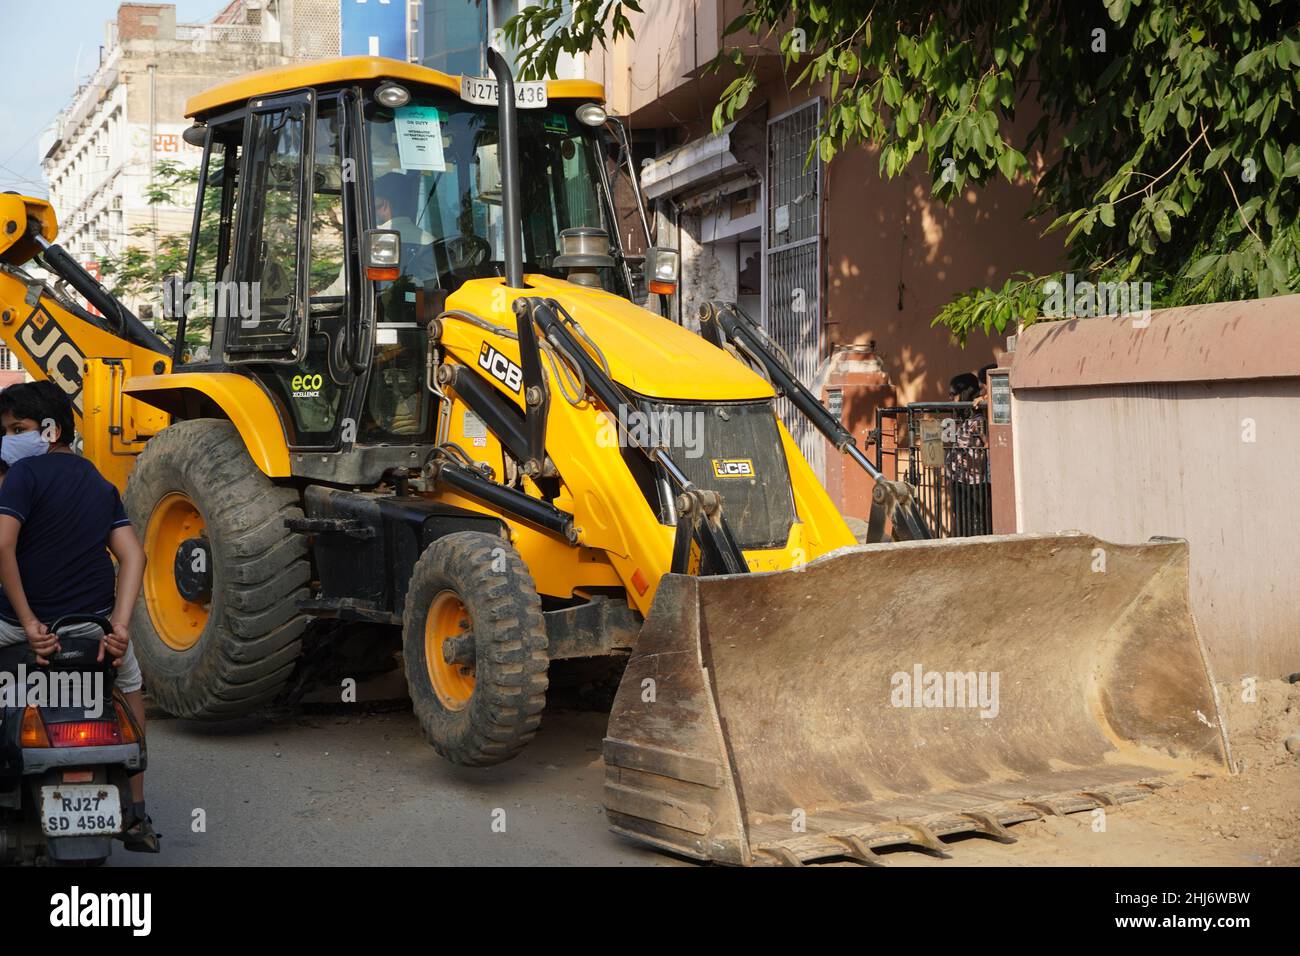 JCB earth moving machine working on a road. JCB bucket loader is repairing a section of a dirt road. Road is expanding in residential quarter. Theme o Stock Photo